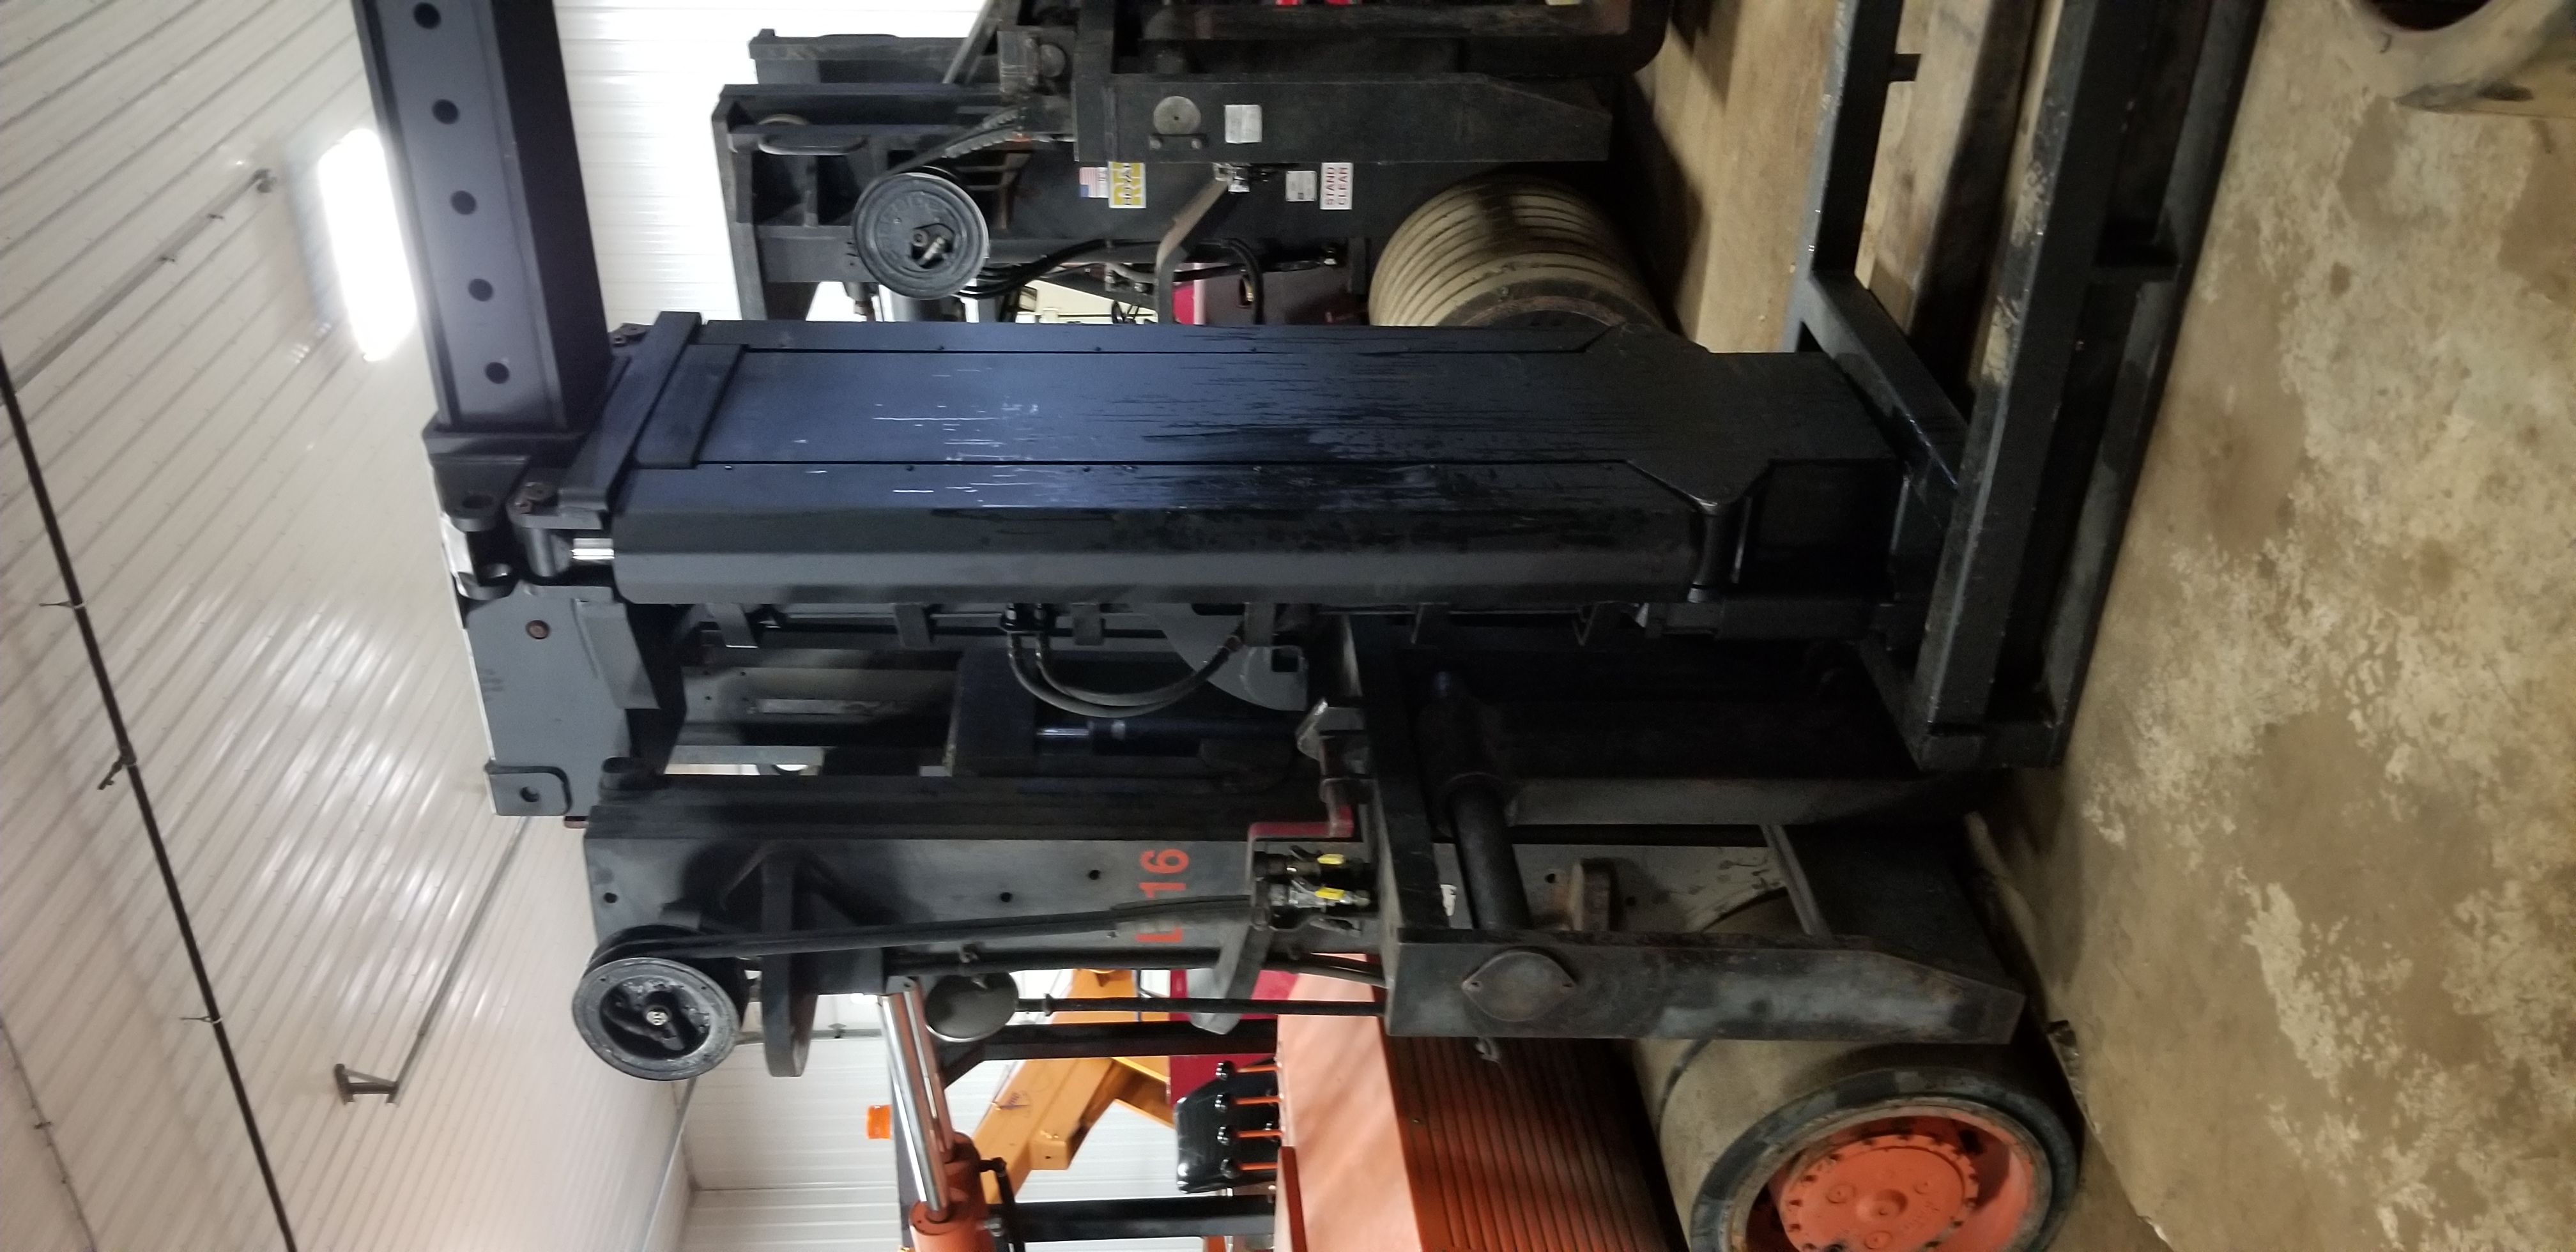 Versa Lift 4060 Forklift For Sale 40 000lb 60 000lb Machinery Business Information